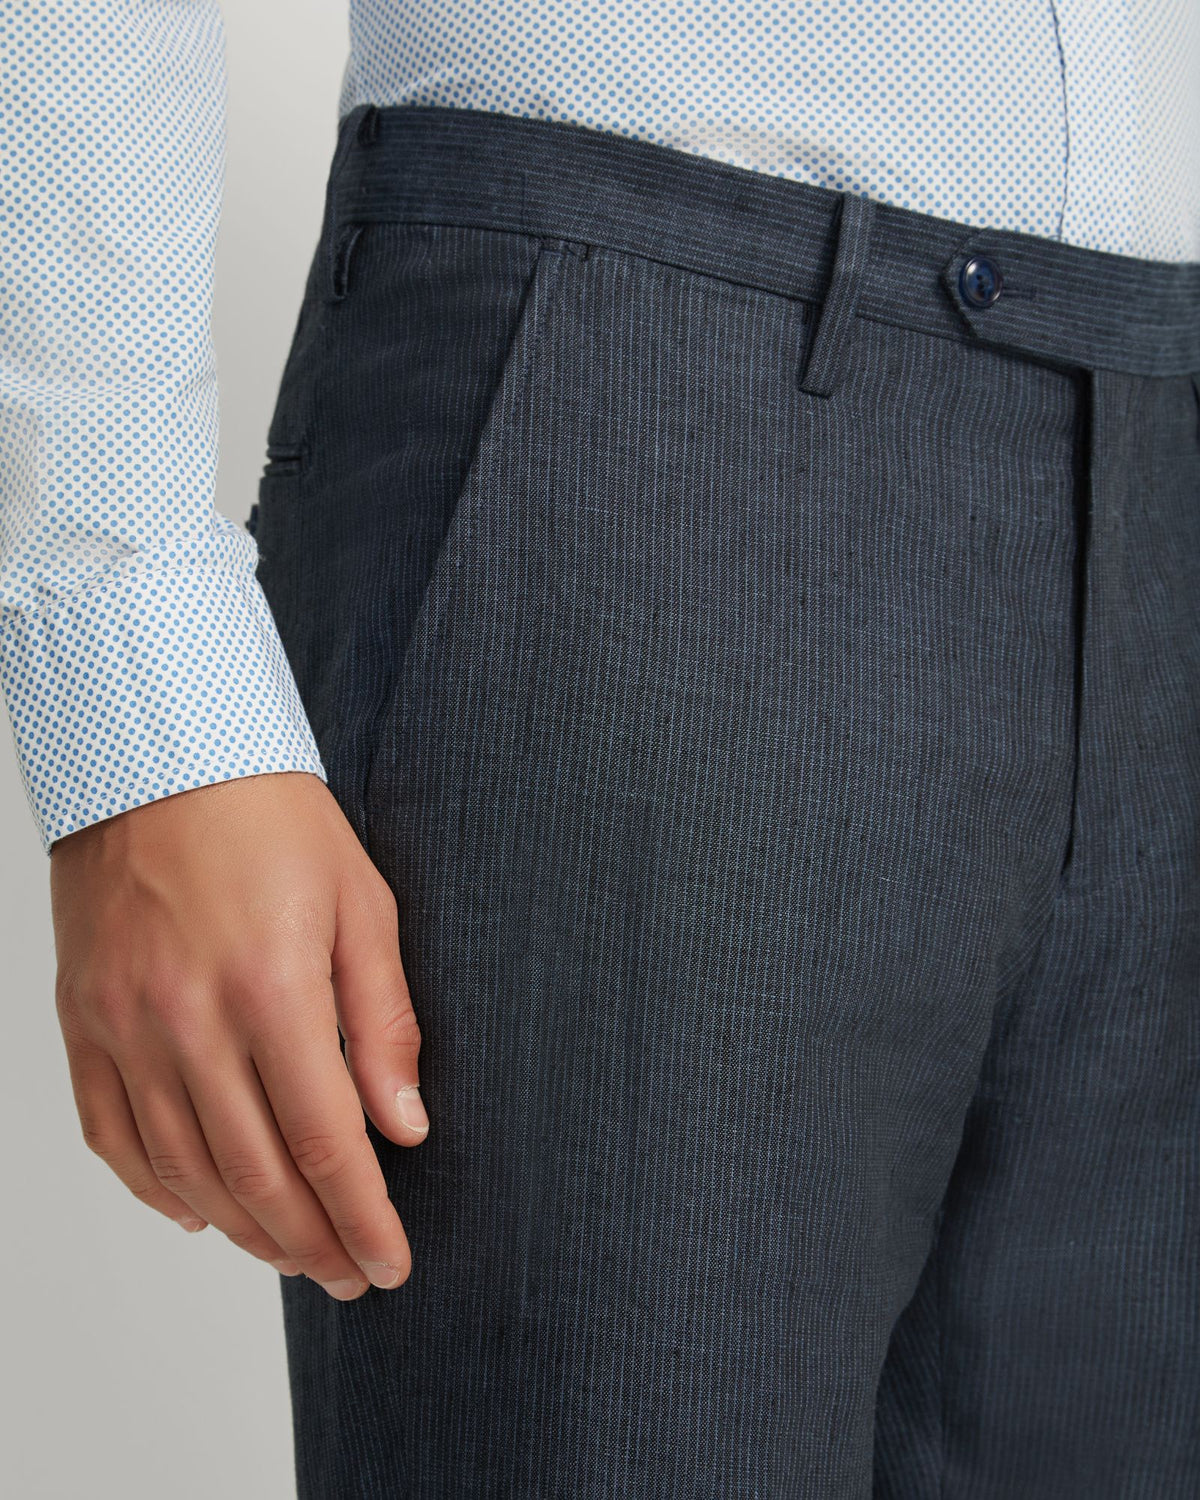 BYRON LINEN TROUSERS - AVAILABLE ~ 1-2 weeks MENS TROUSERS